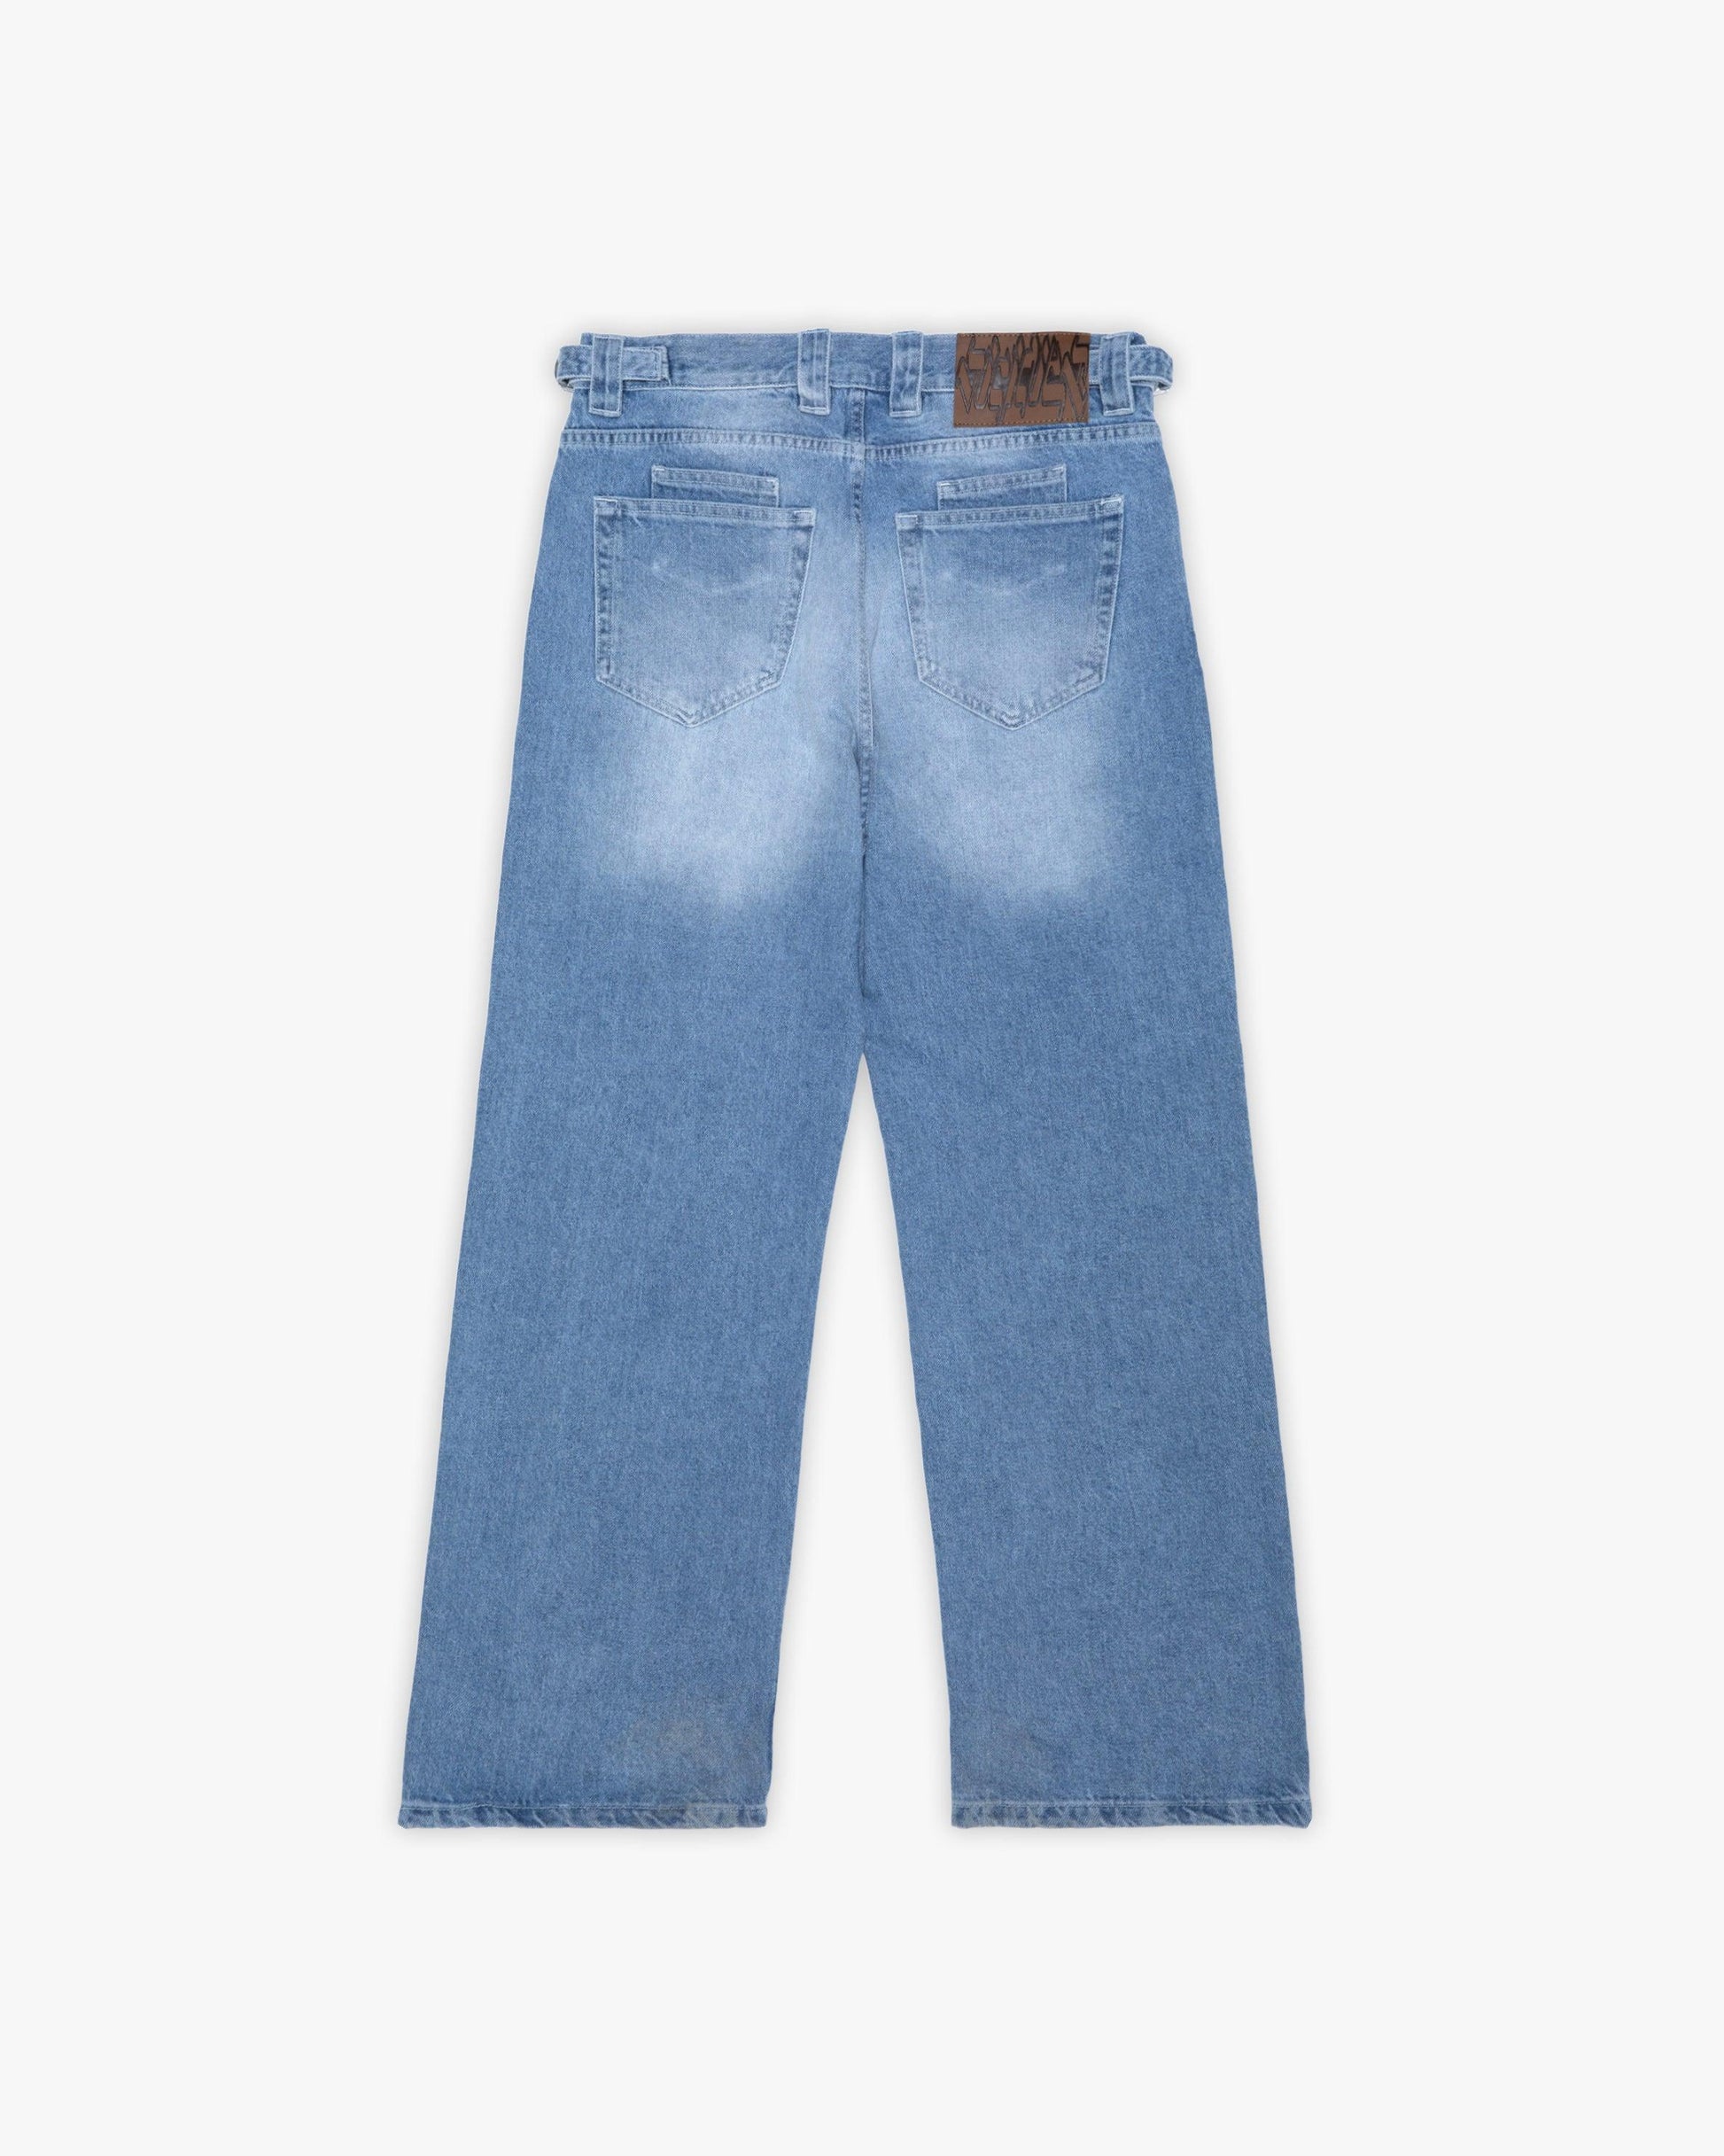 OUTLINED MIRAGE DENIM LIGHT BLUE / WHITE - VICINITY